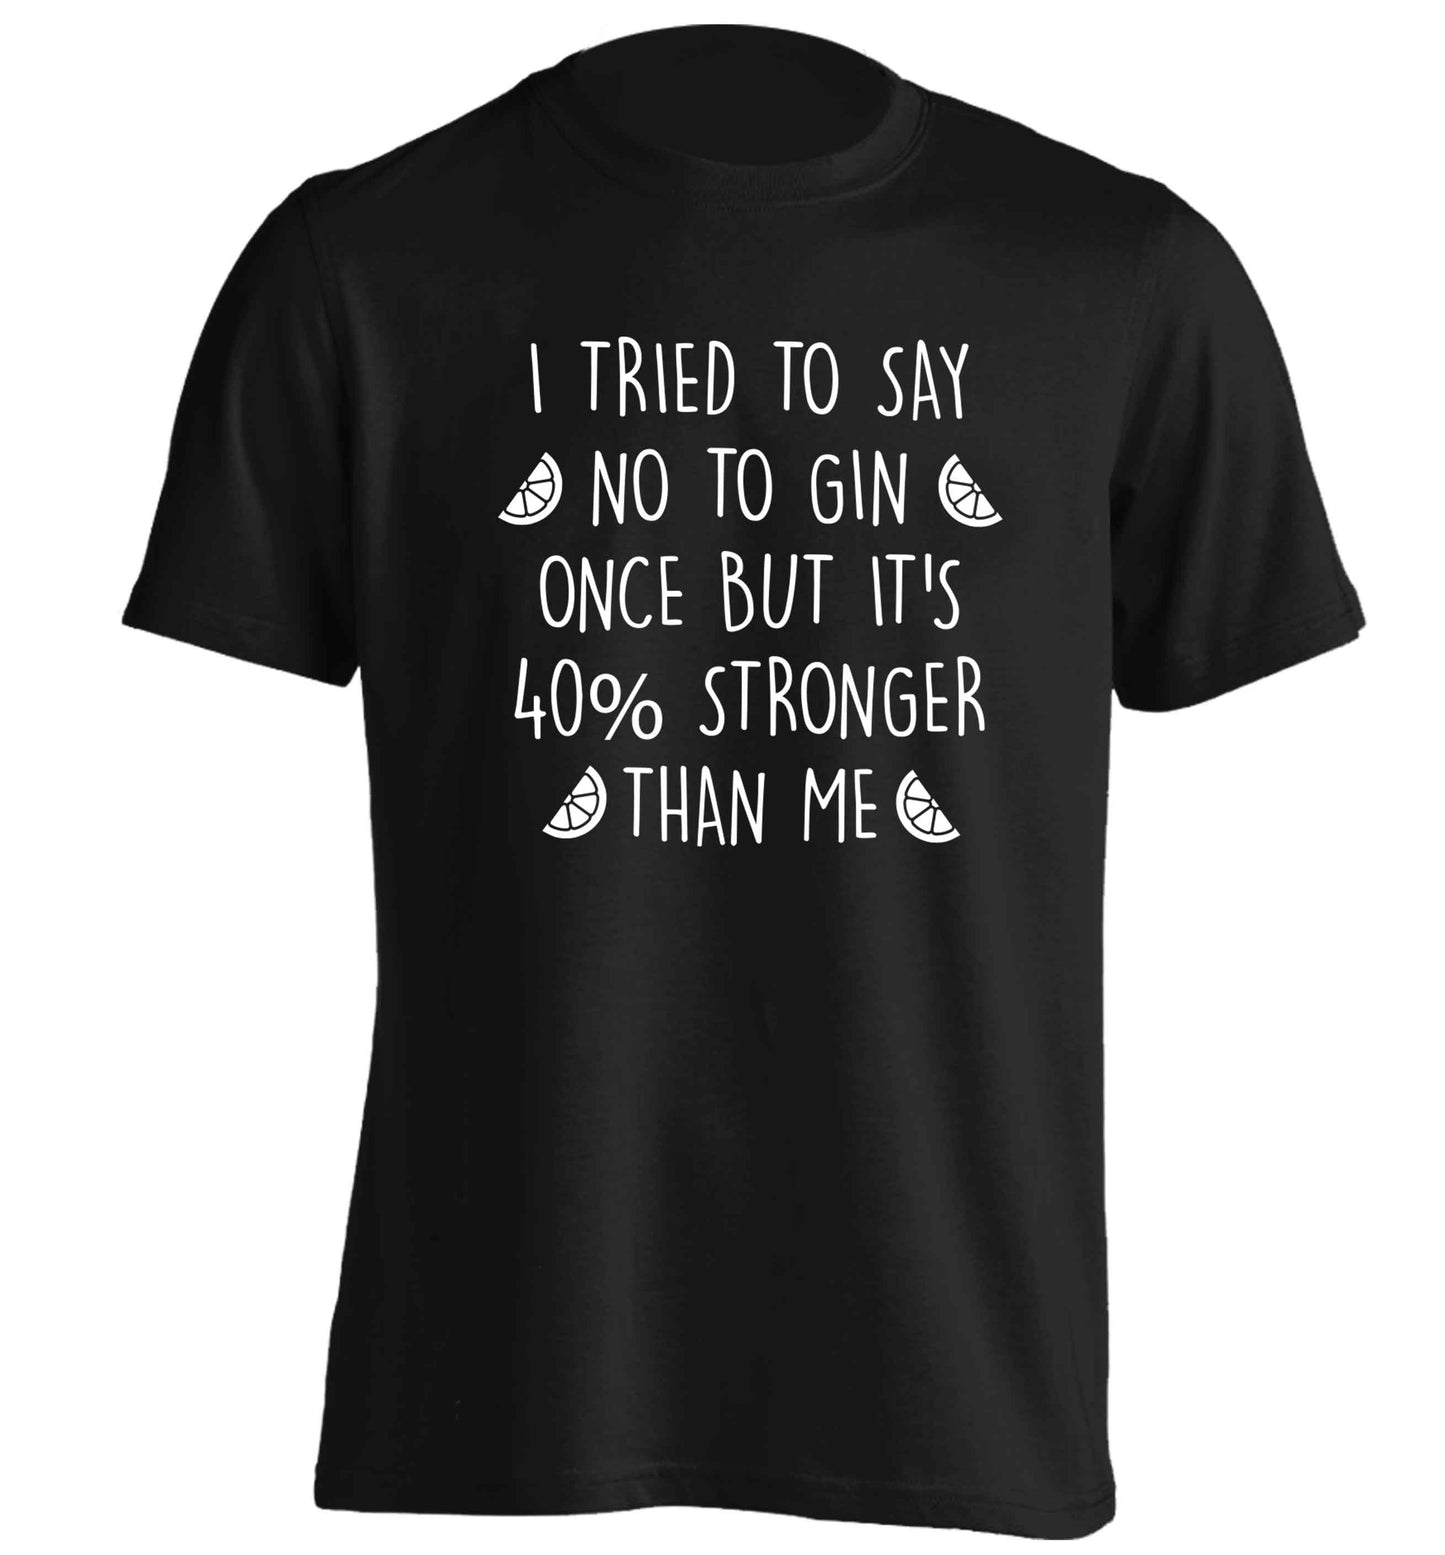 I tried to say no to gin once but it's 40% stronger than me adults unisex black Tshirt 2XL